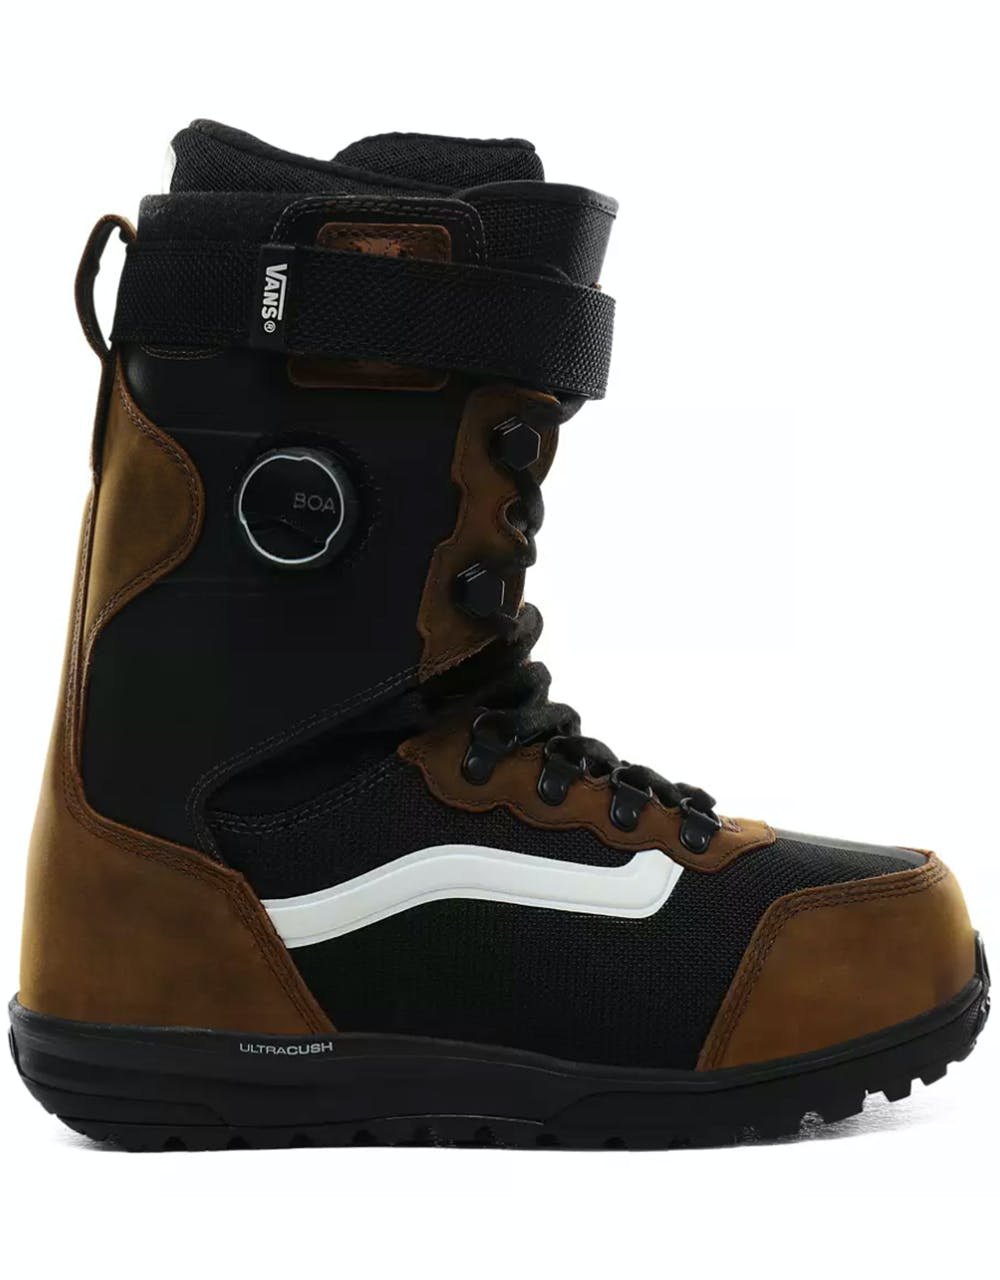 Vans Infuse 2020 Snowboard Boots - (Pat Moore) Brown/Black – Route One